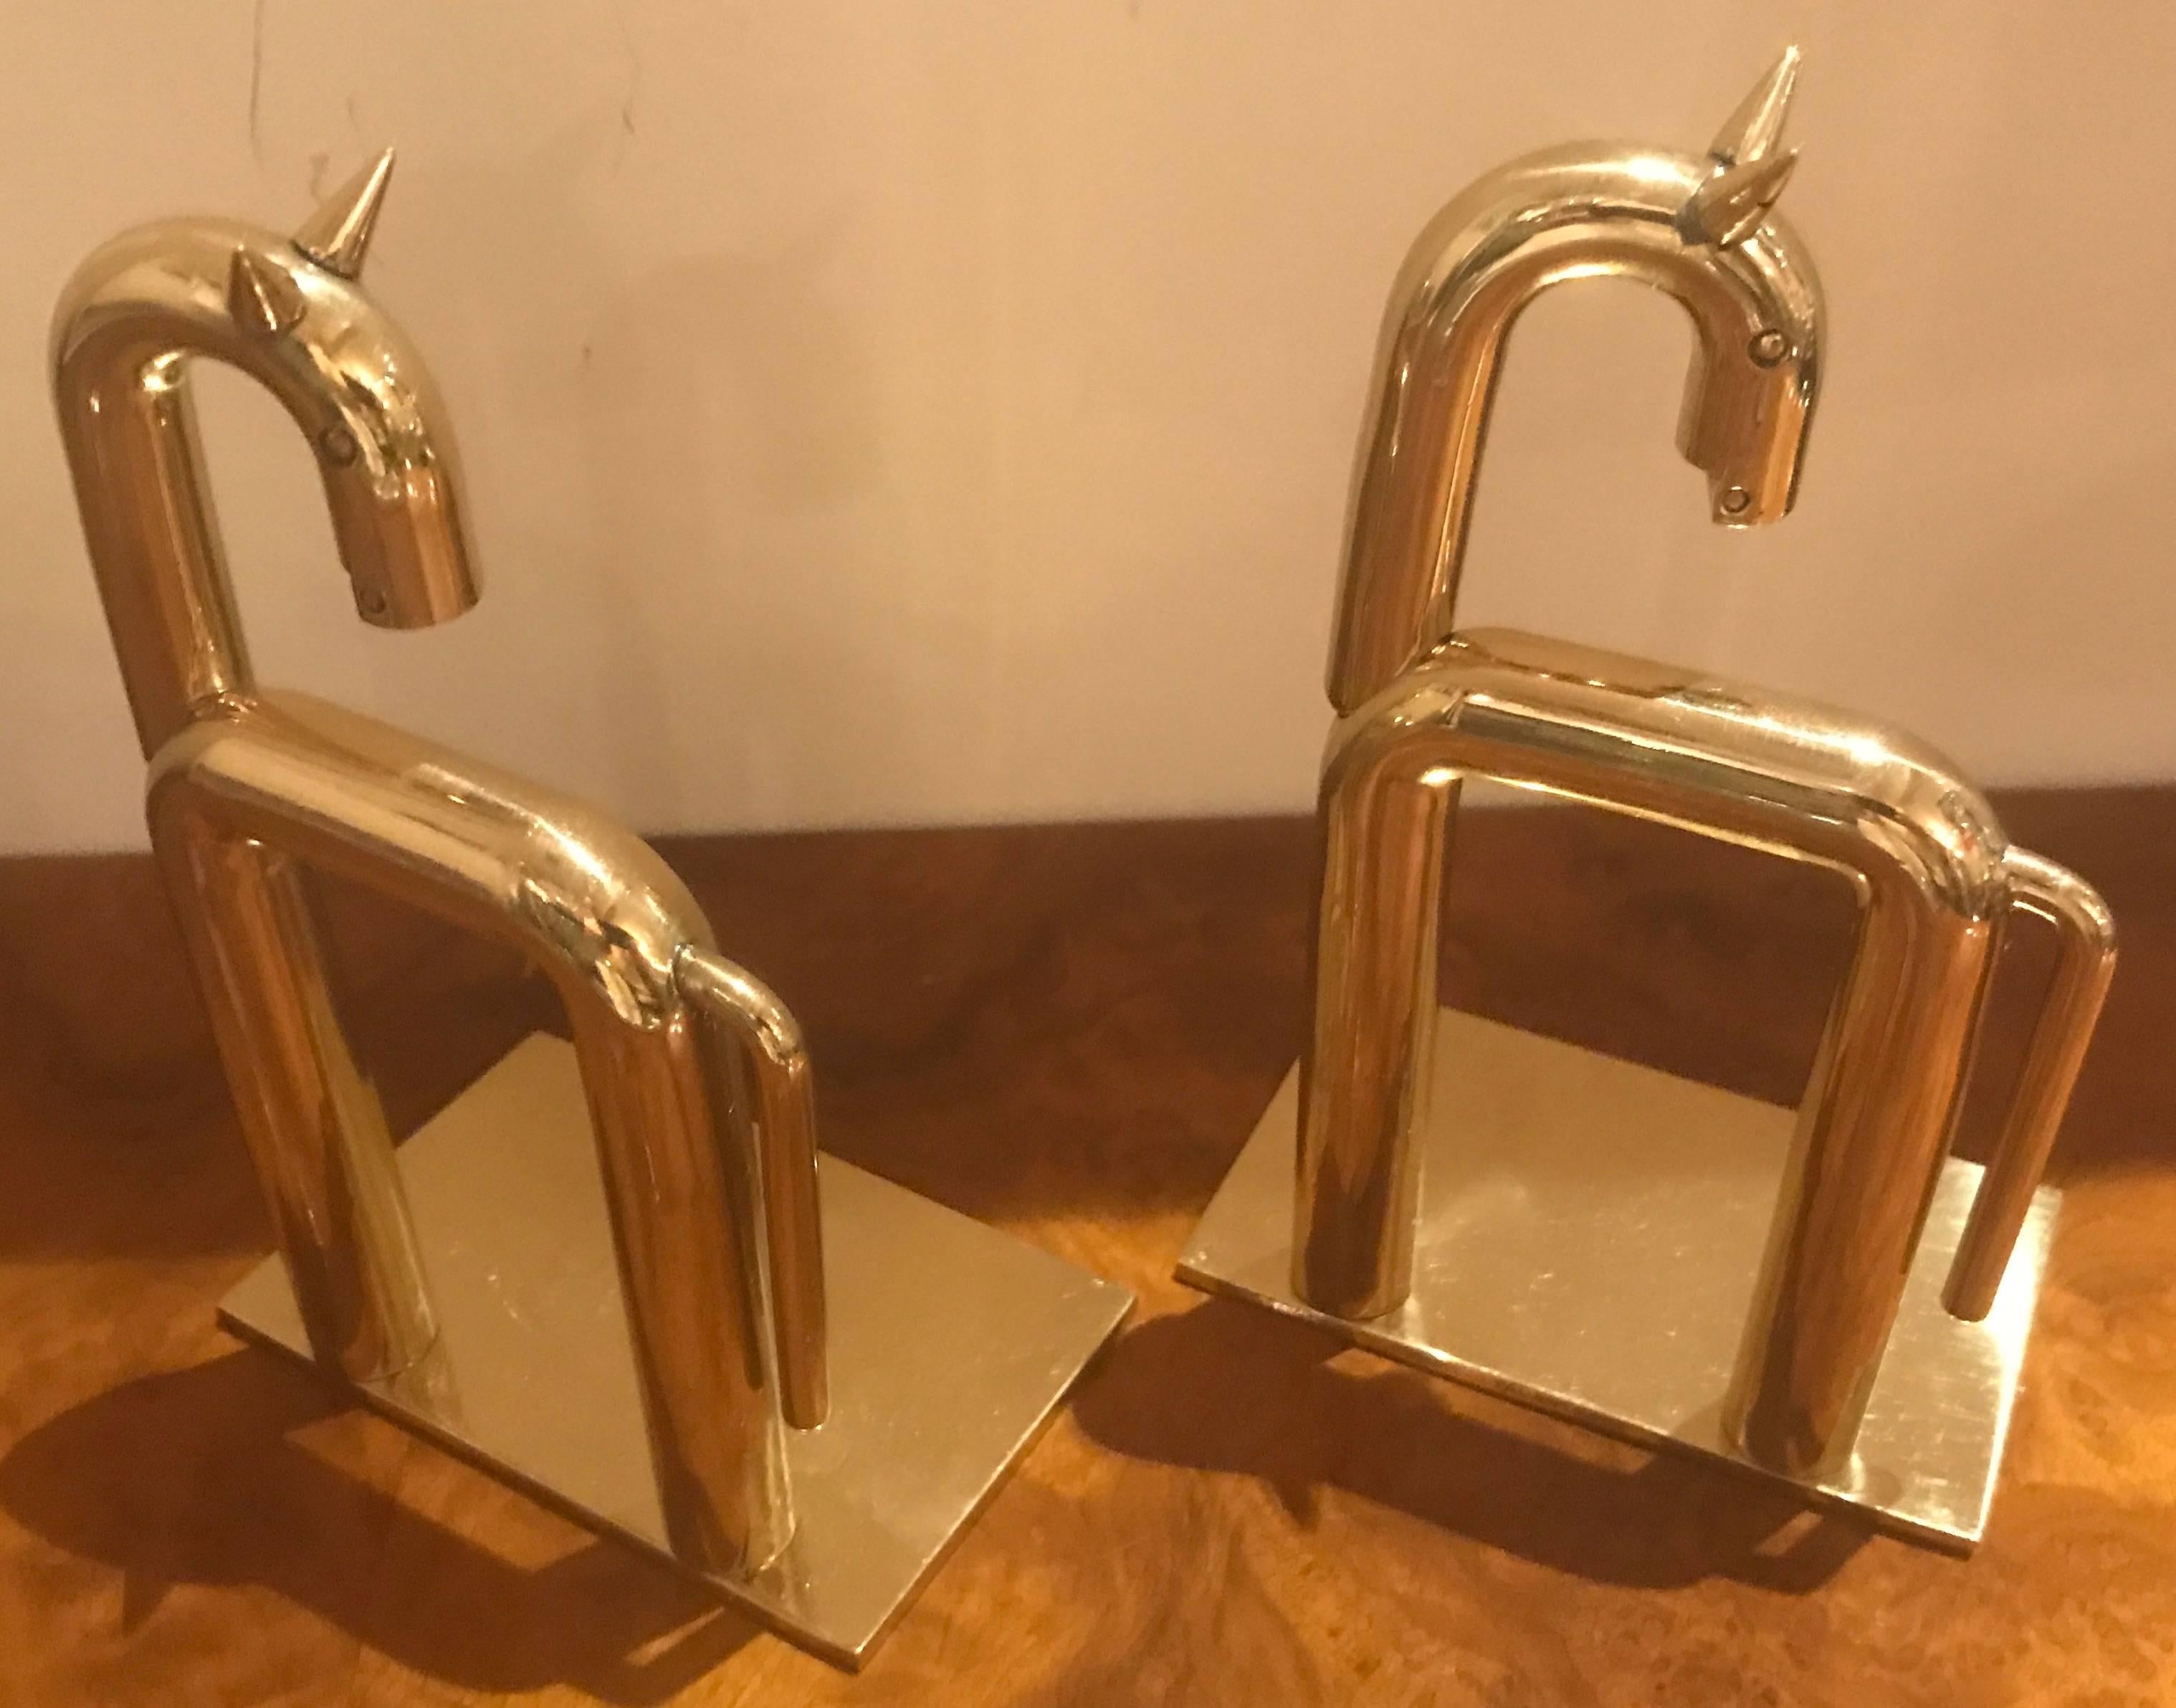 Pair of Chase Equestrian bookends sculpture designed by Walter Von Nessen in 1932. Industrial Design incorporated with the latest materials and machine age approach. These are in mint condition with newly polished brass finish. Von Nessen was the